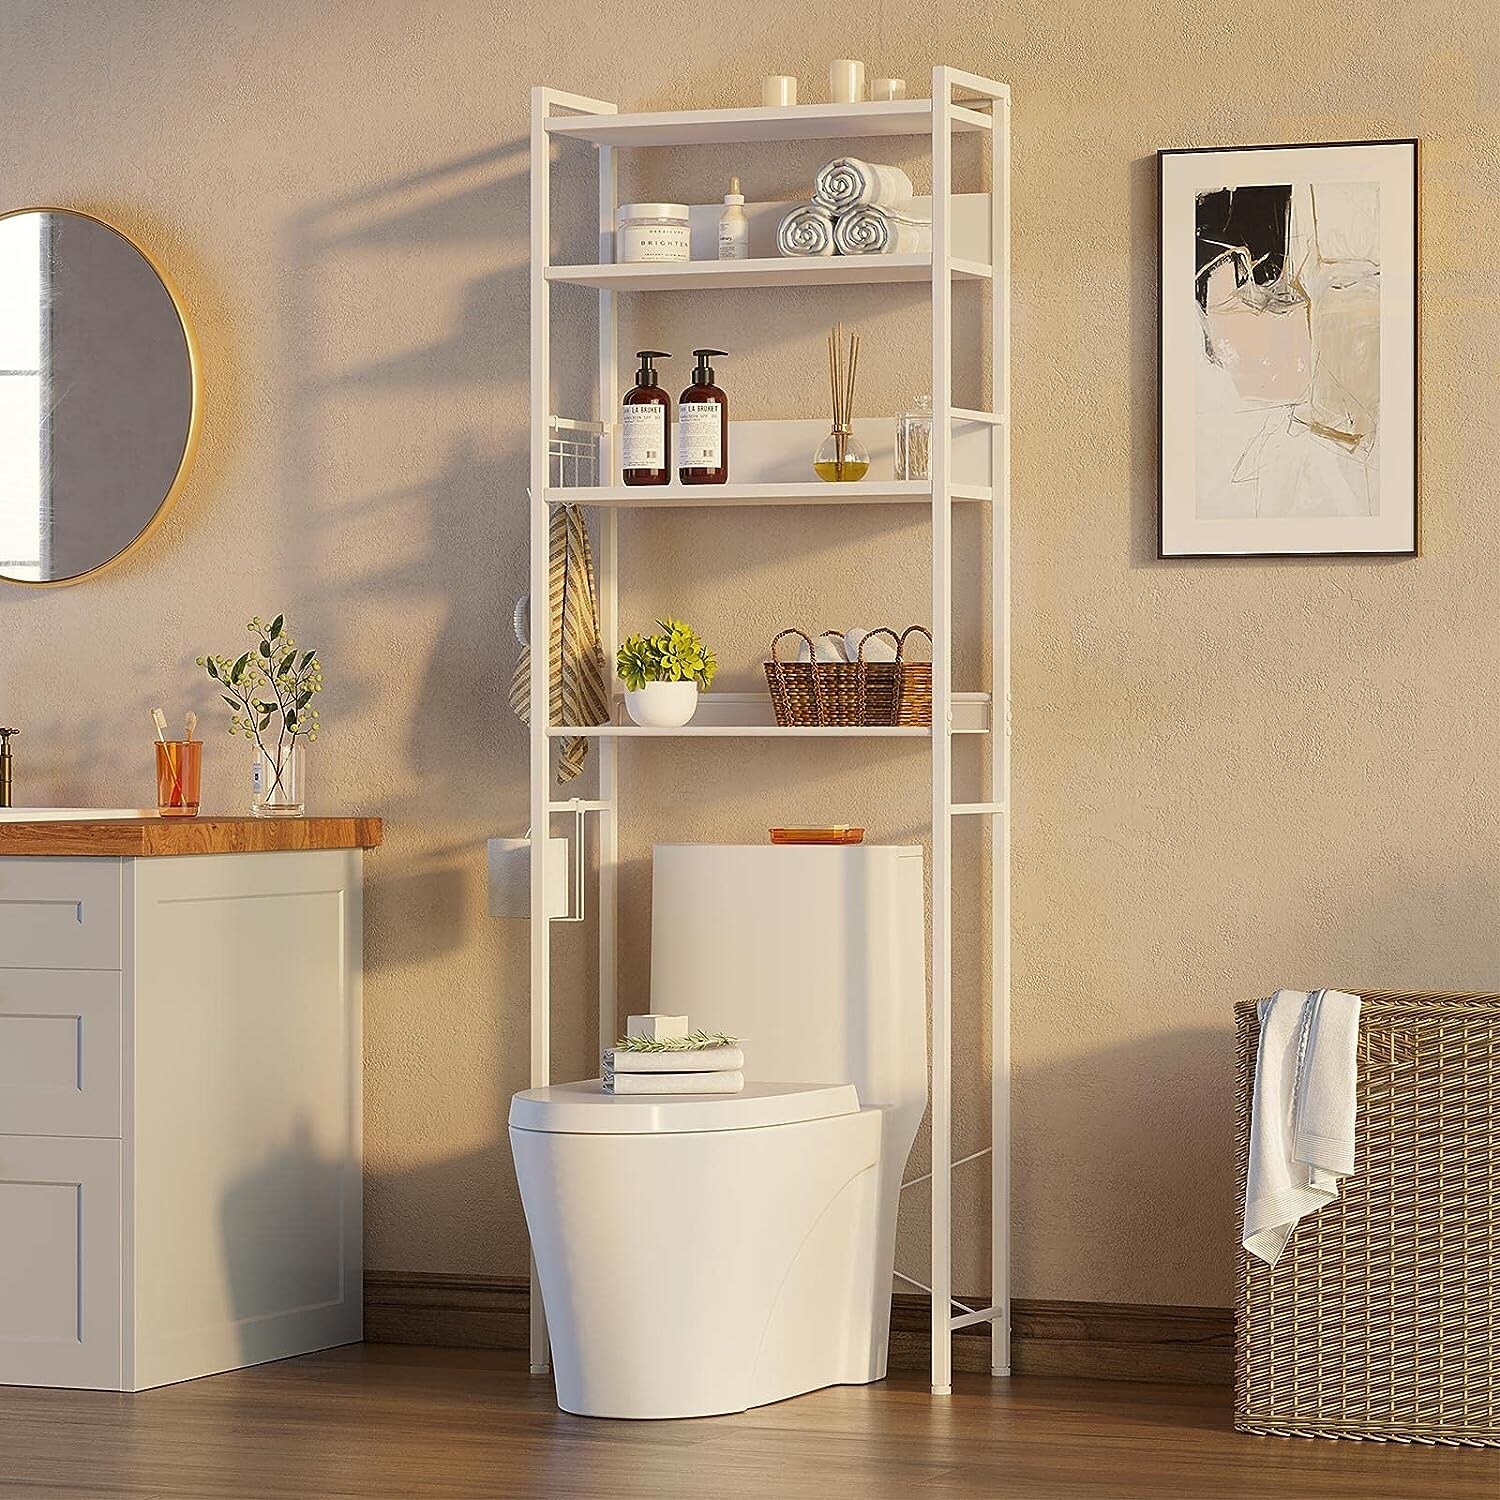 https://ak1.ostkcdn.com/images/products/is/images/direct/1033831b1cd347c0cab6fcf3caaf6b245183409f/Freestanding-4-Tier-Wooden-Over-The-Toilet-Storage-Shelf-with-Hooks.jpg